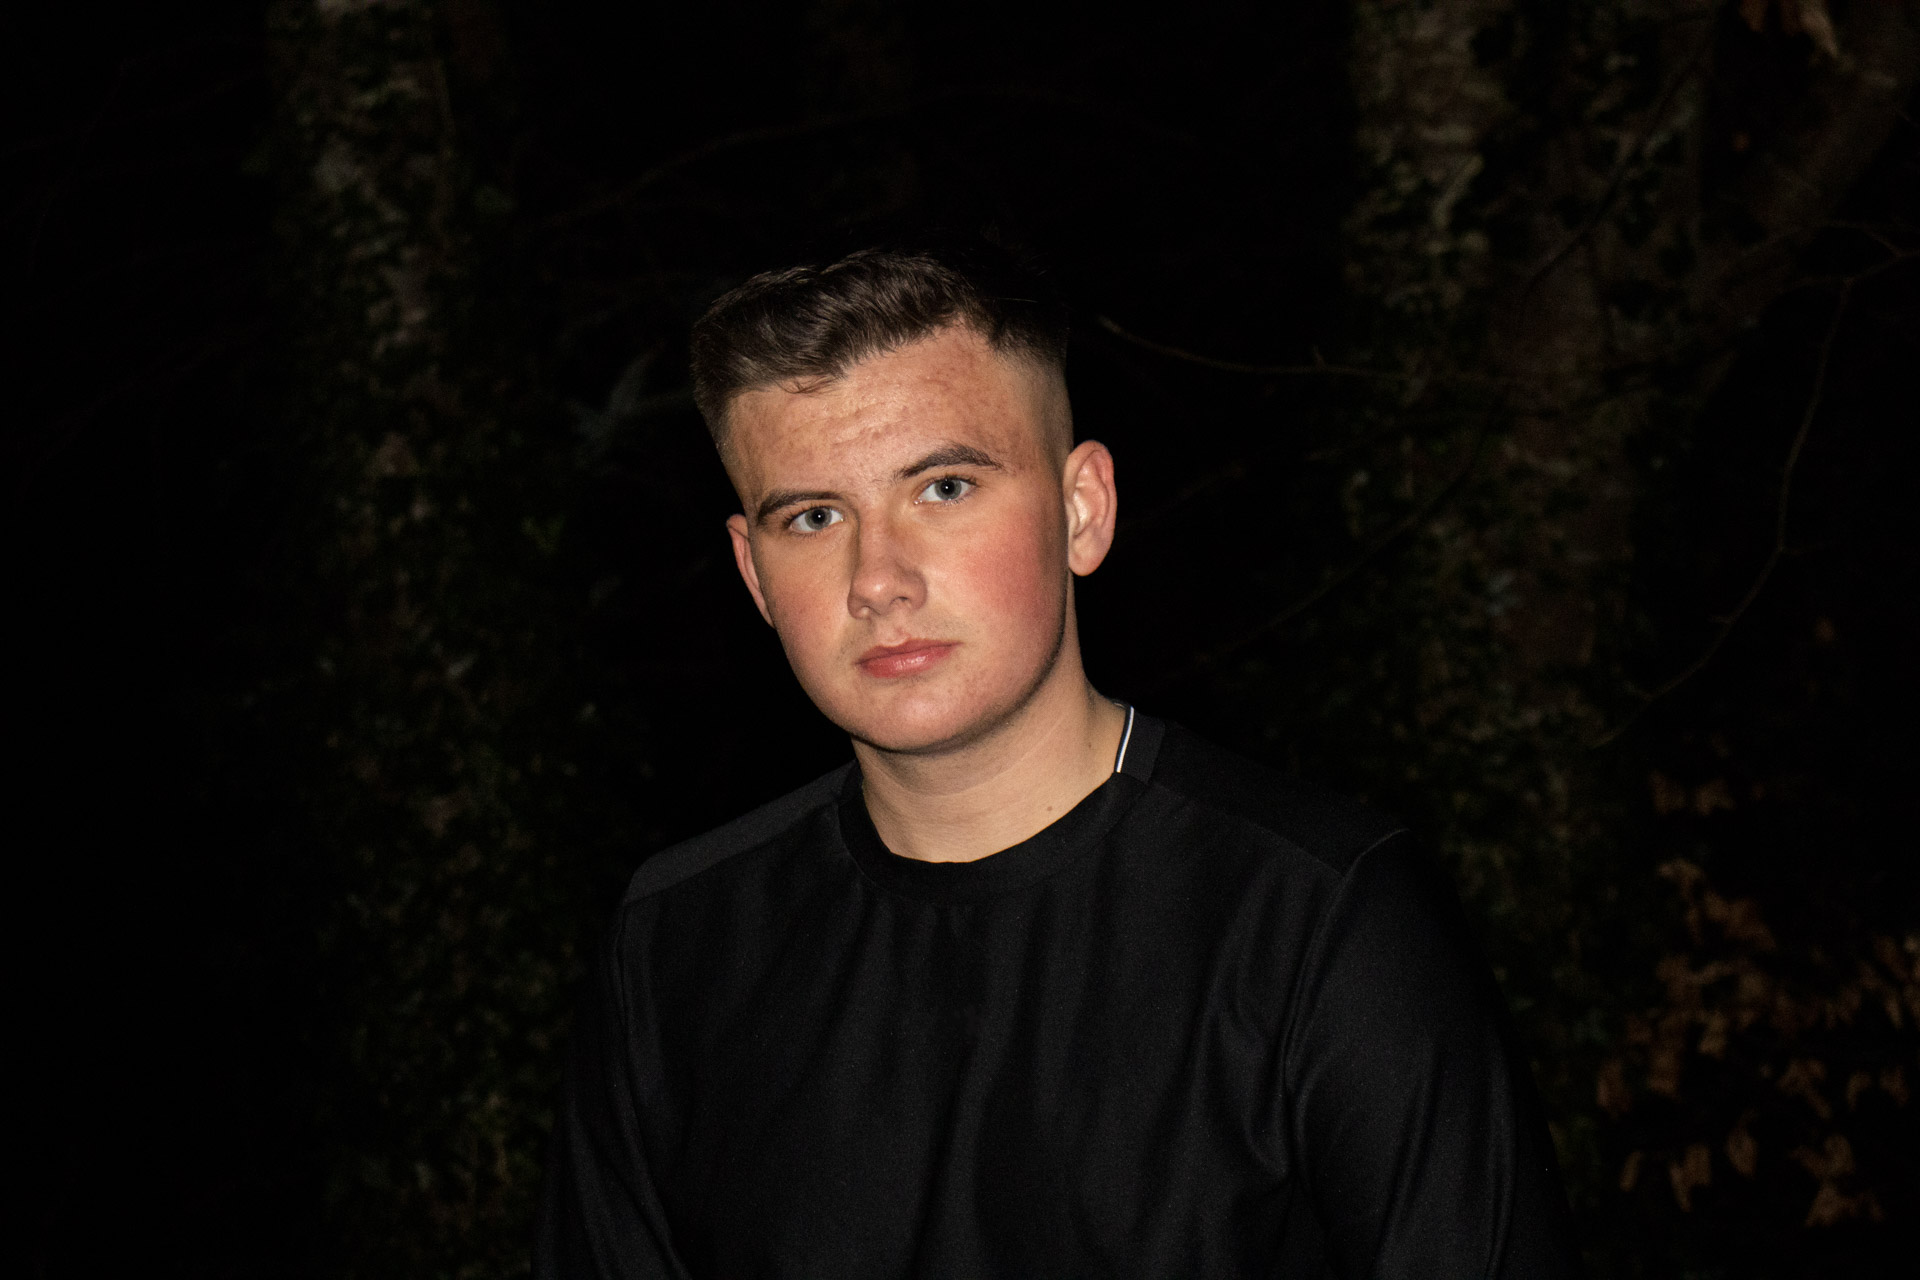 Lee James signed to record deal - The Limerick DJ has signed with legendary label Warner UK.